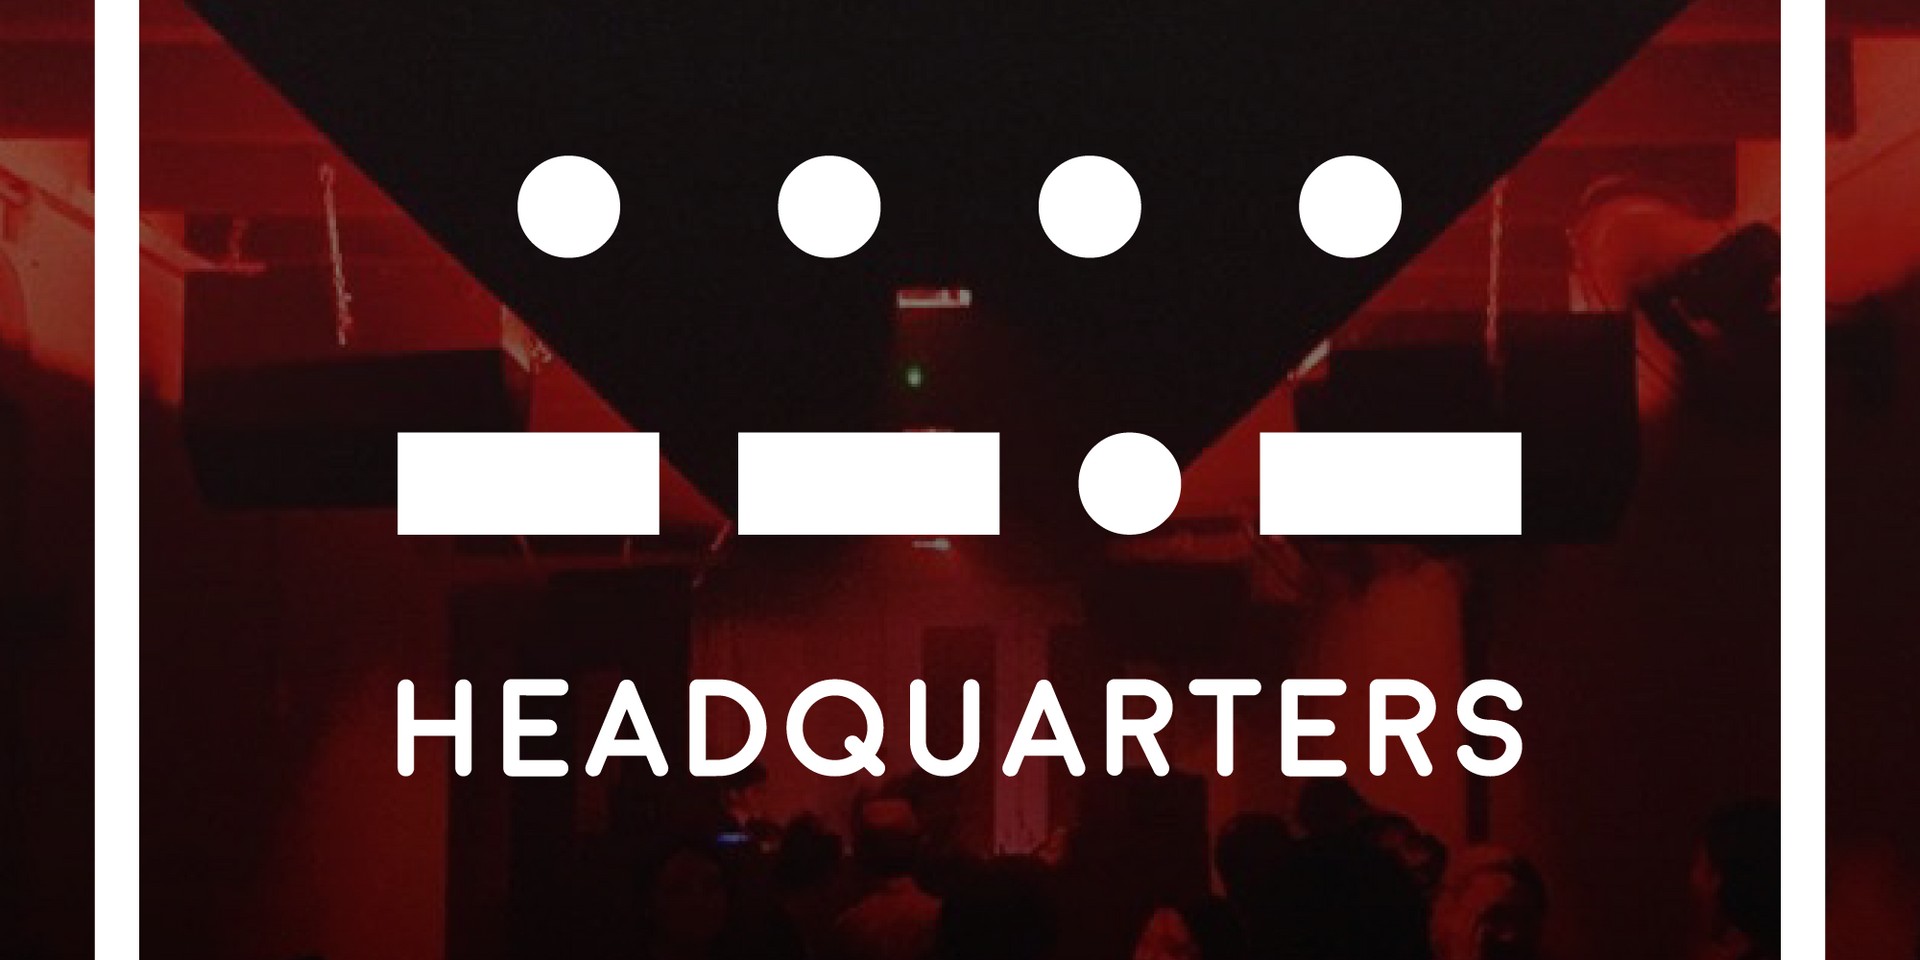 Headquarters by The Council - Singapore's newest house & techno club now open